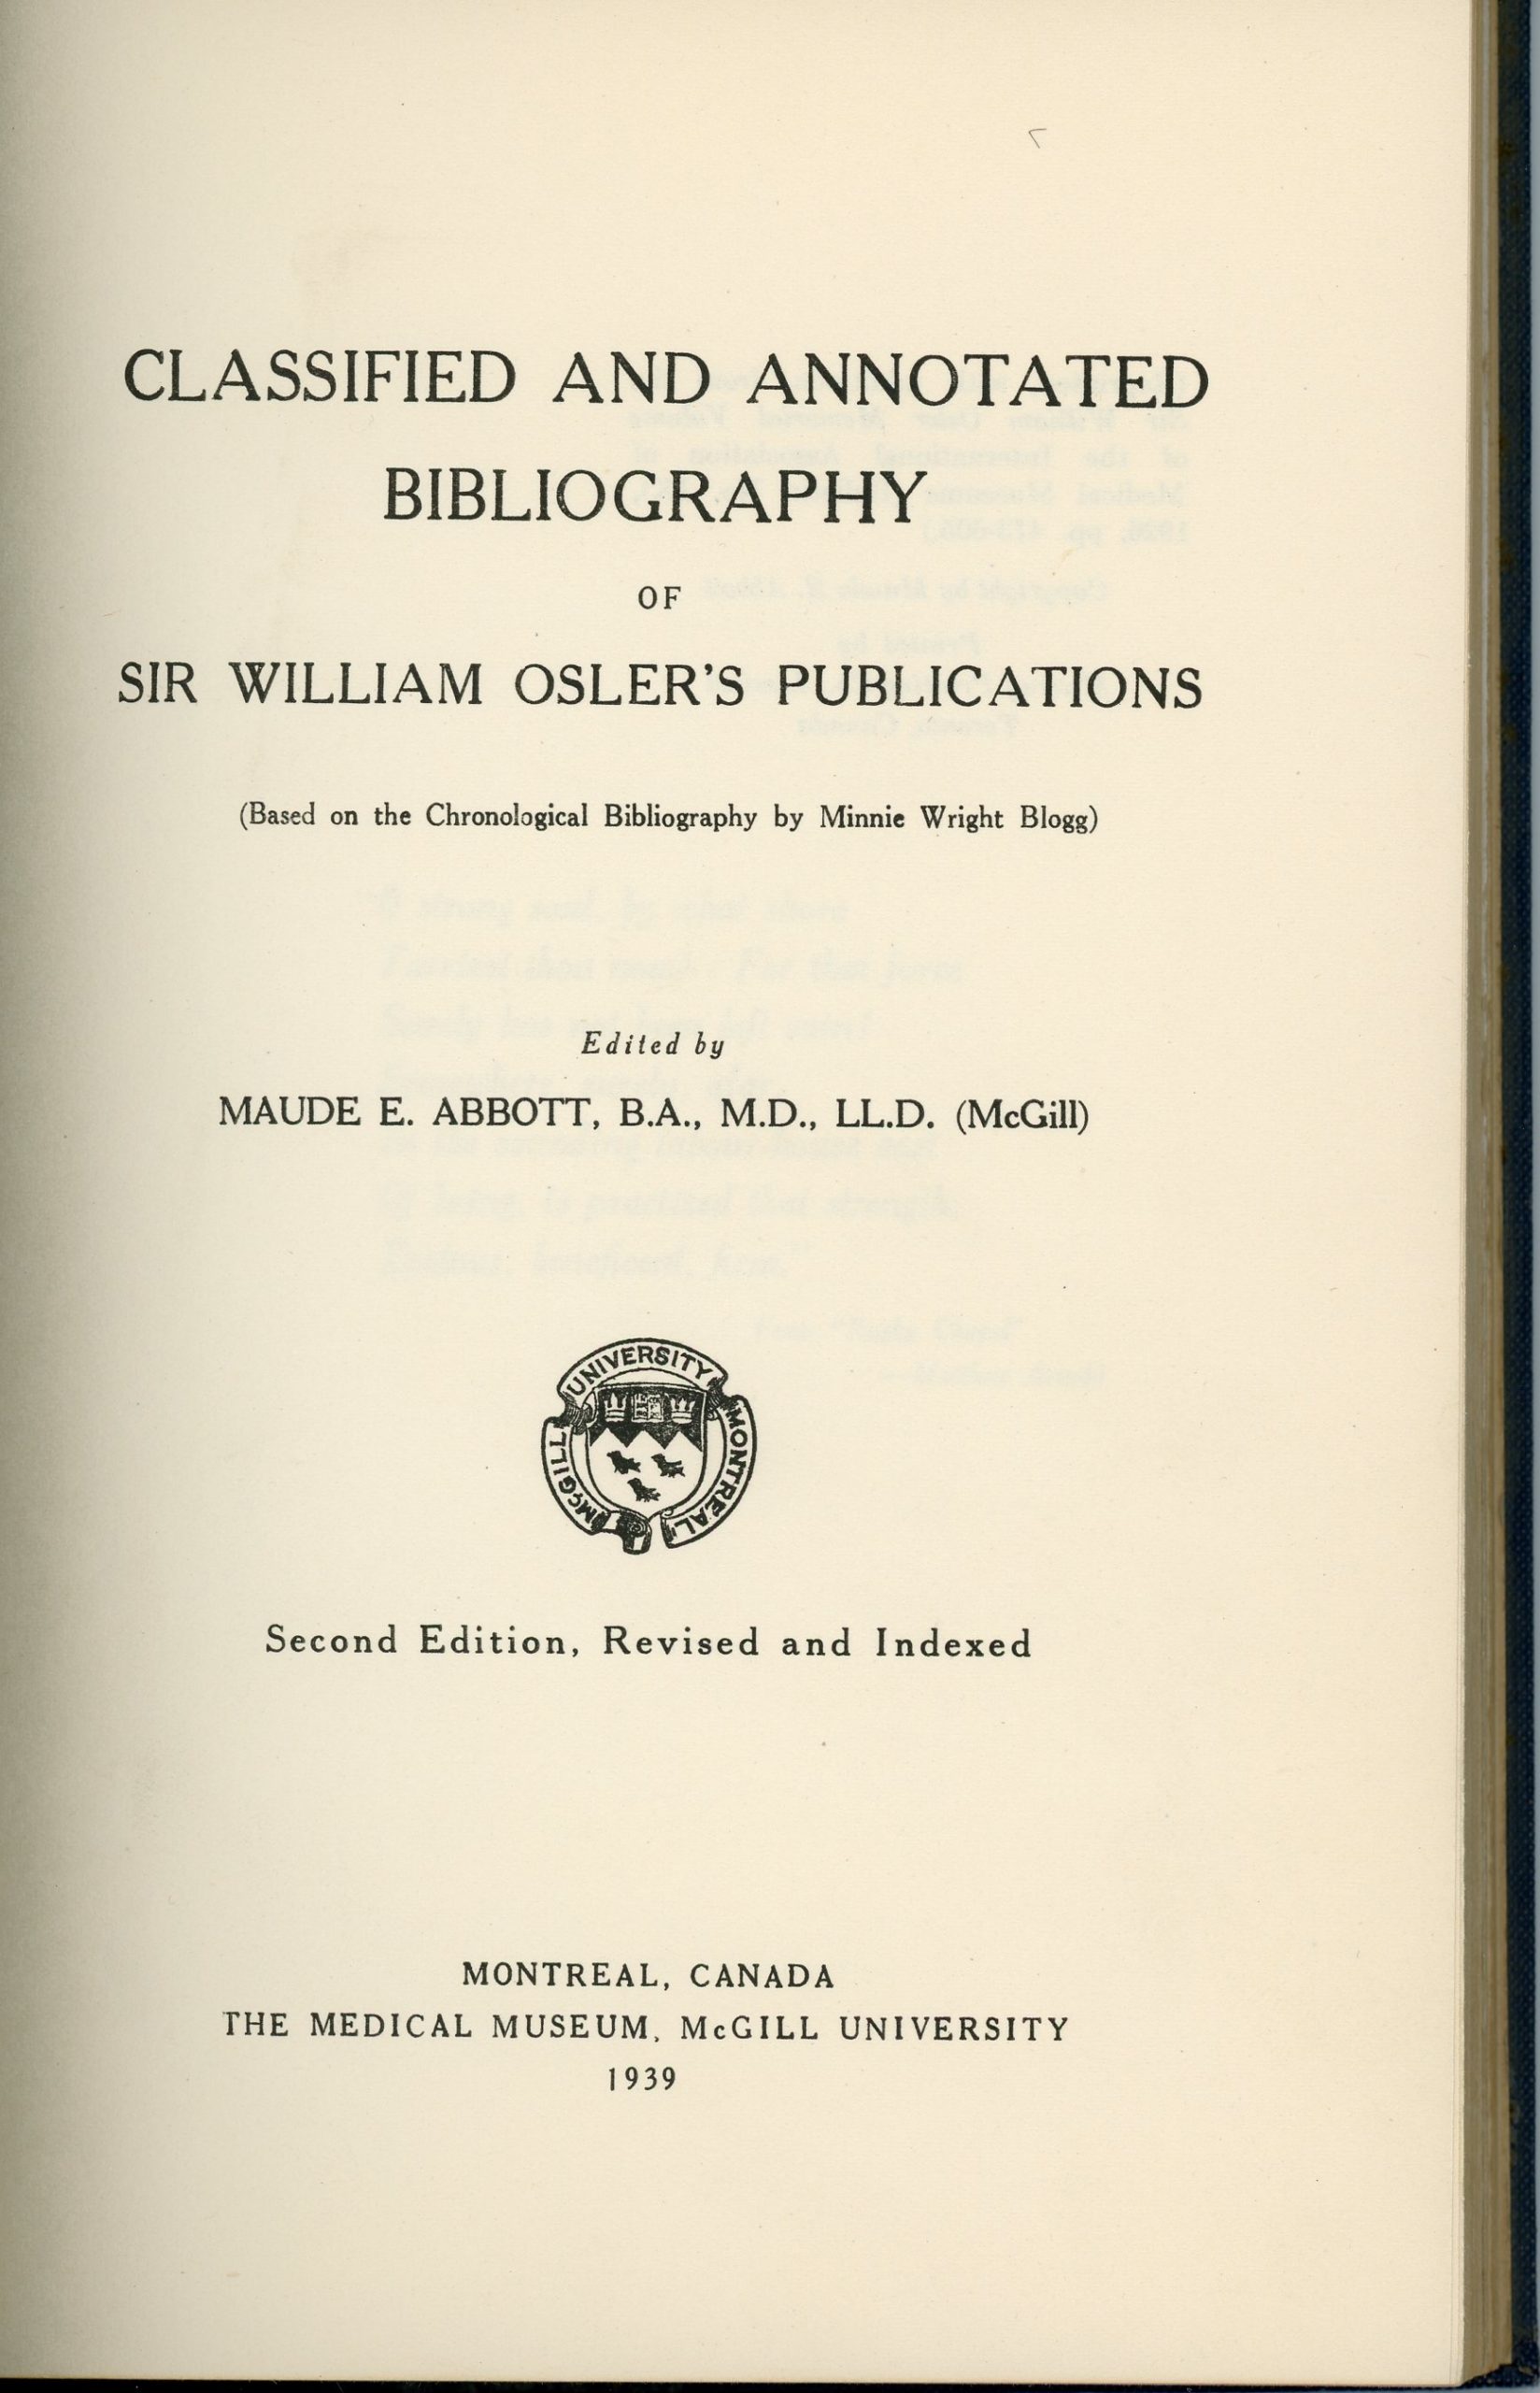 First page of the Classified Bibliography of Sir William Osler, black ink on sepia paper. It contains the following text: “Classified and Annotated Bibliography Of Sir William Osler’s Publications (Based on the Chronological Bibliography by Minnie Wright Blogg) Edited by Maude E. Abbott, B.A., M.D., LL.D. (McGill)” The McGill University coat of arms appears under this title, followed by: “Second Edition, Revised and Indexed Montreal, Canada The Medical Museum, McGill University 1939”.